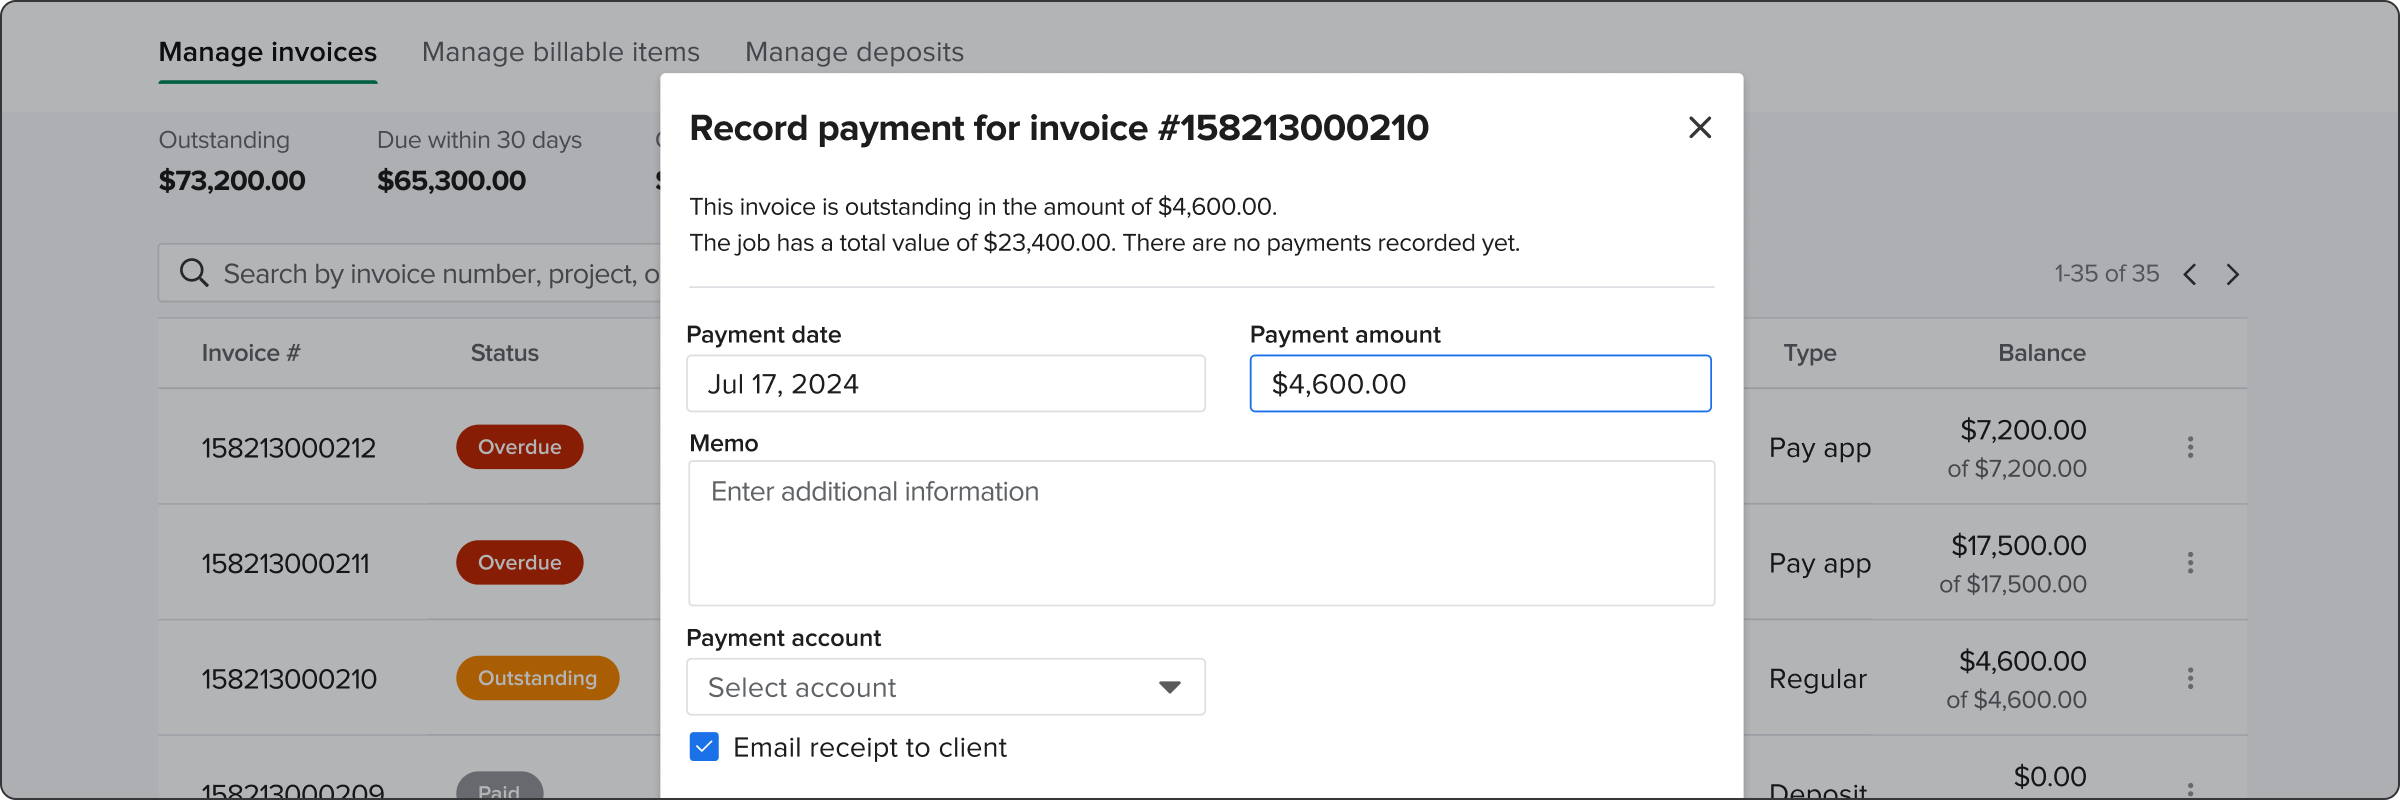 Product view displaying how to record payment for an outstanding invoice | Excavating contractor | Knowify